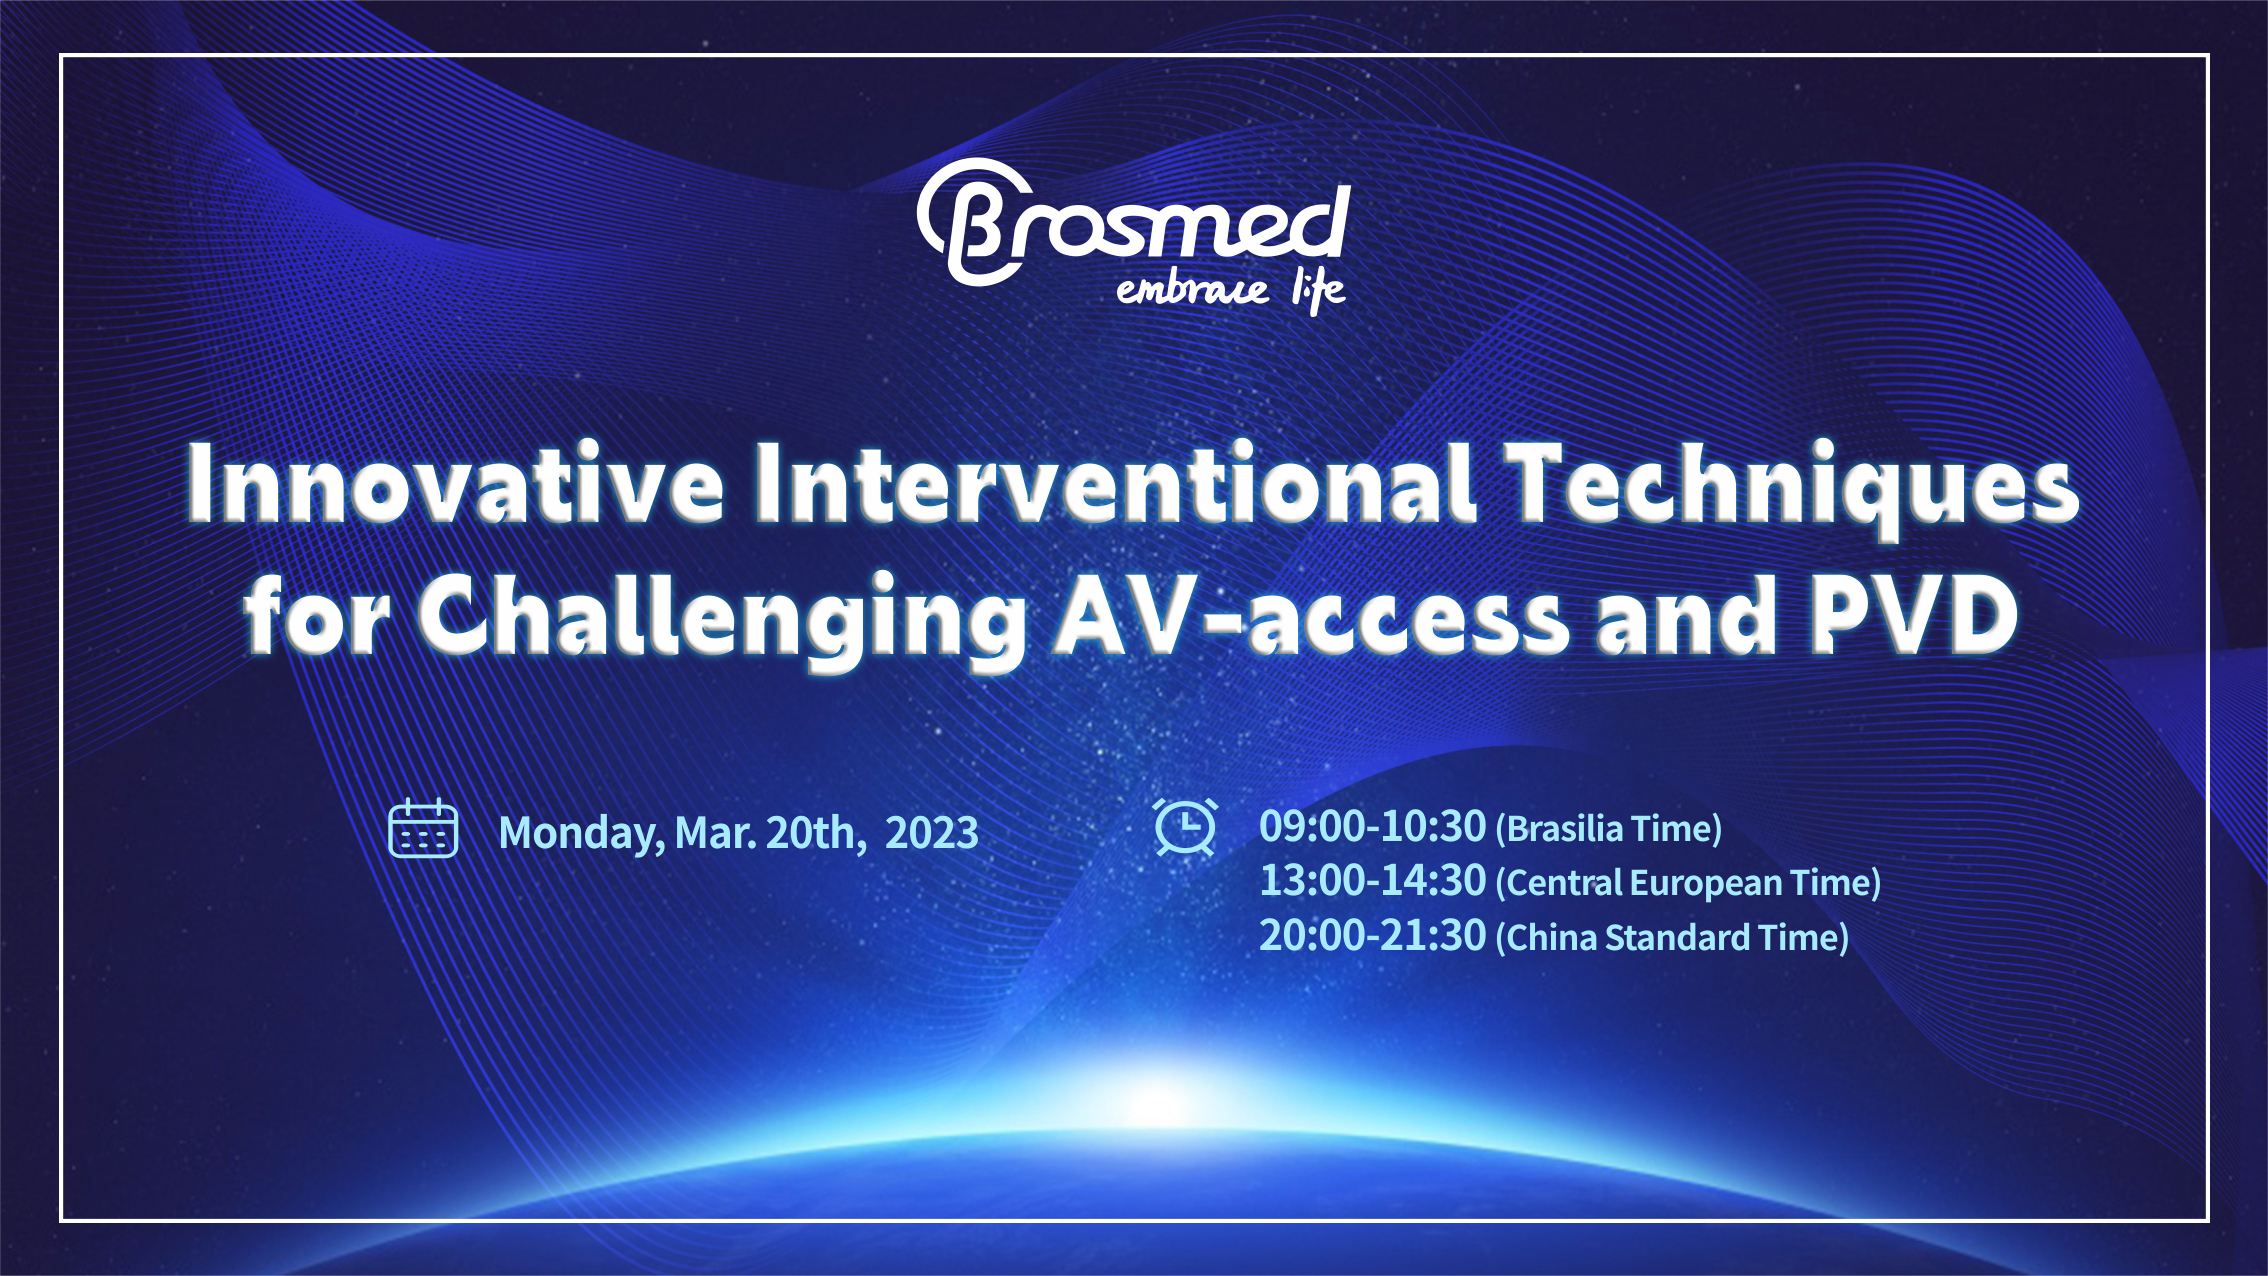 Innovative Interventional Techniques for Challenging AV-access and PVD